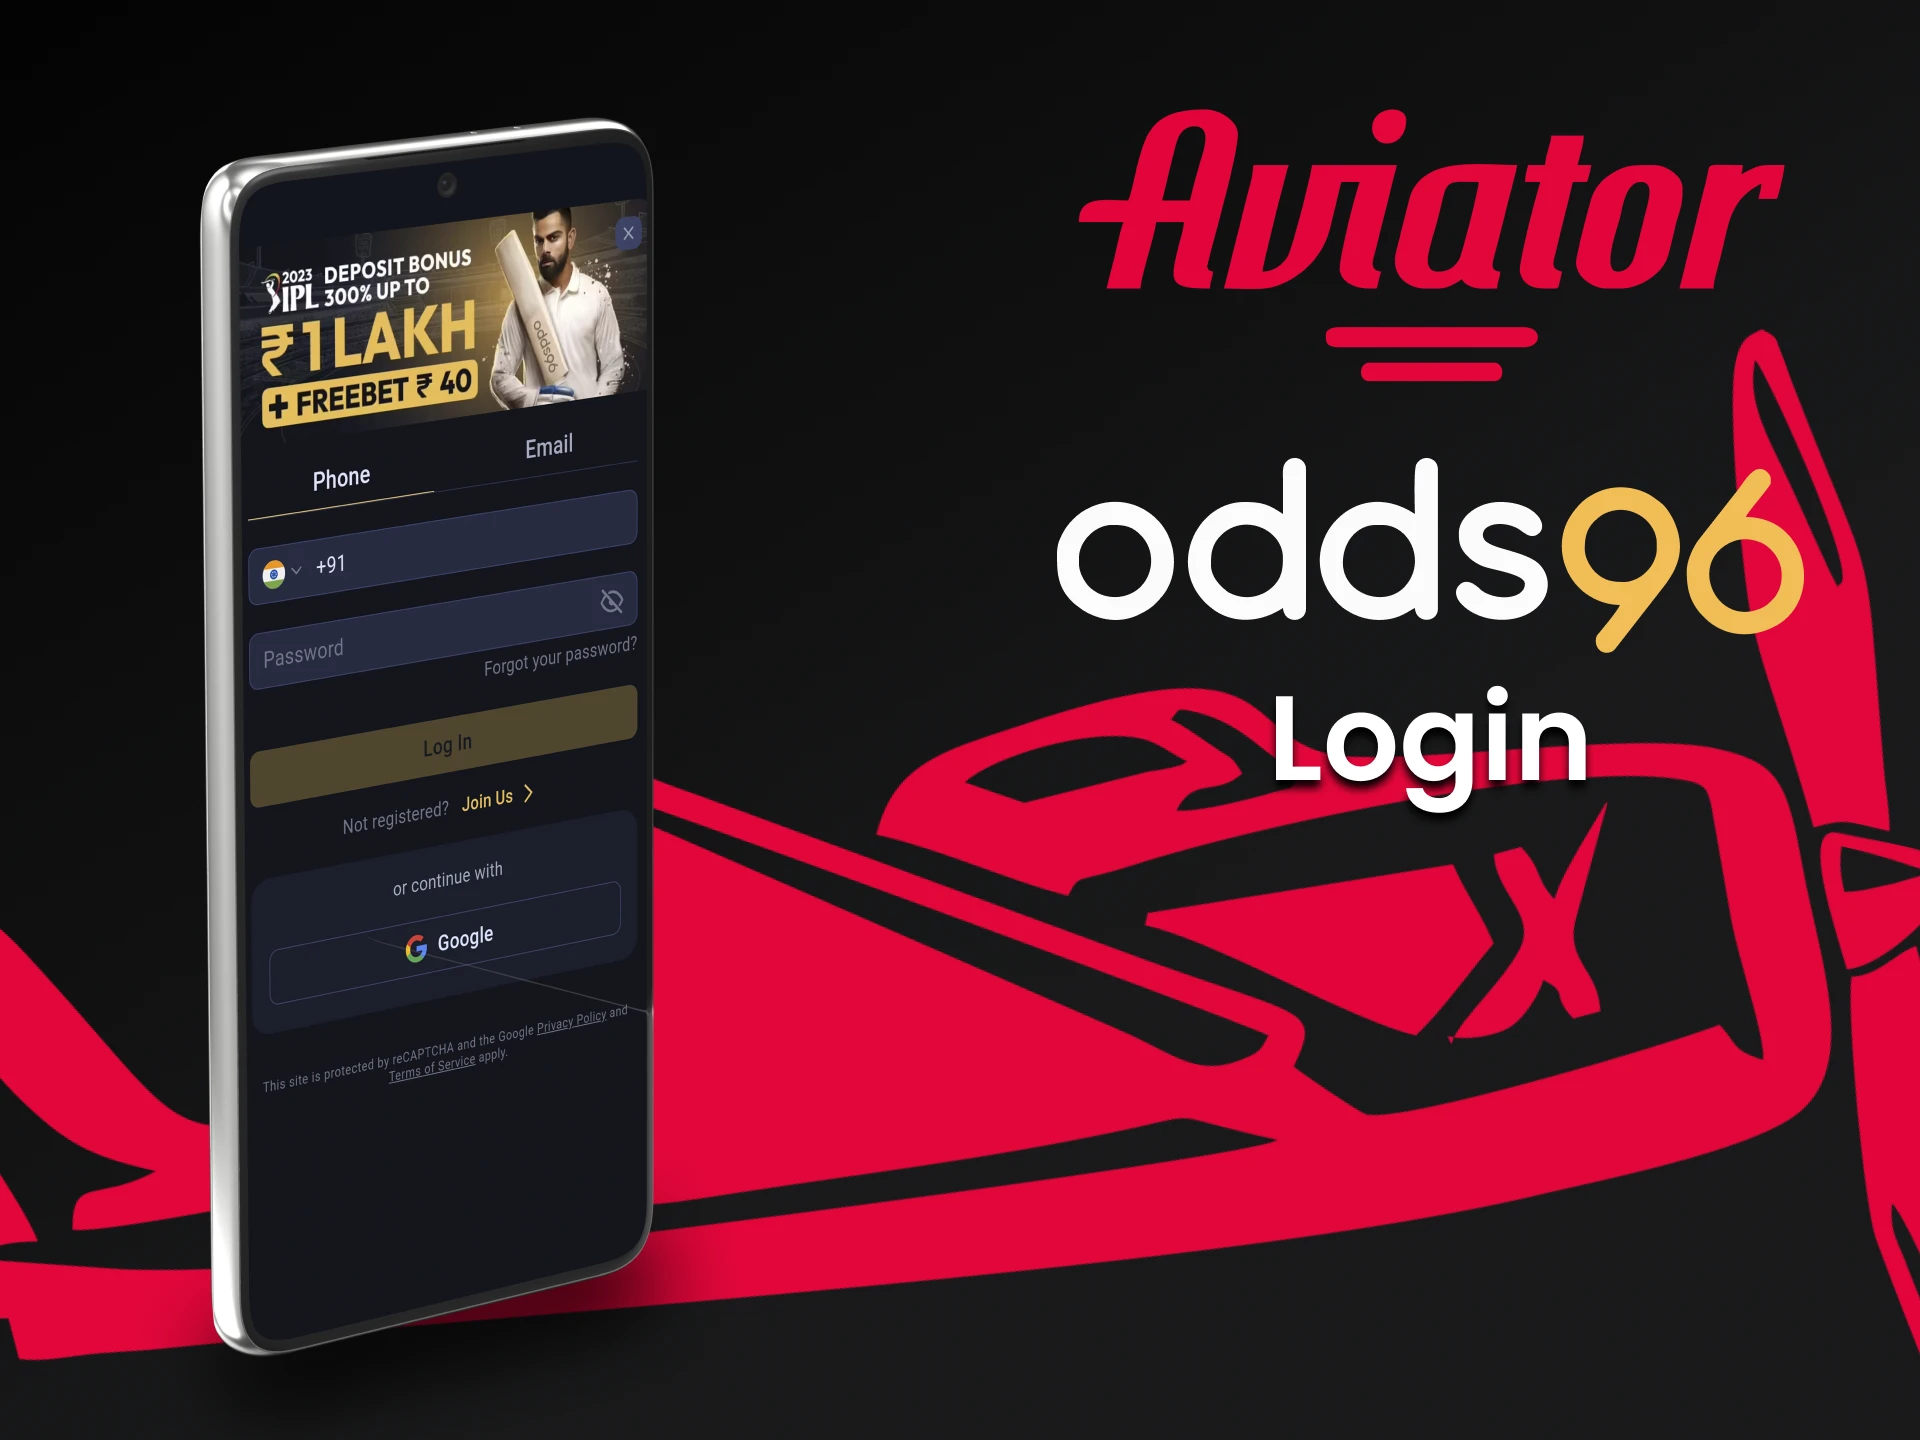 Log in to your personal account through the Odds96 app to play Aviator.